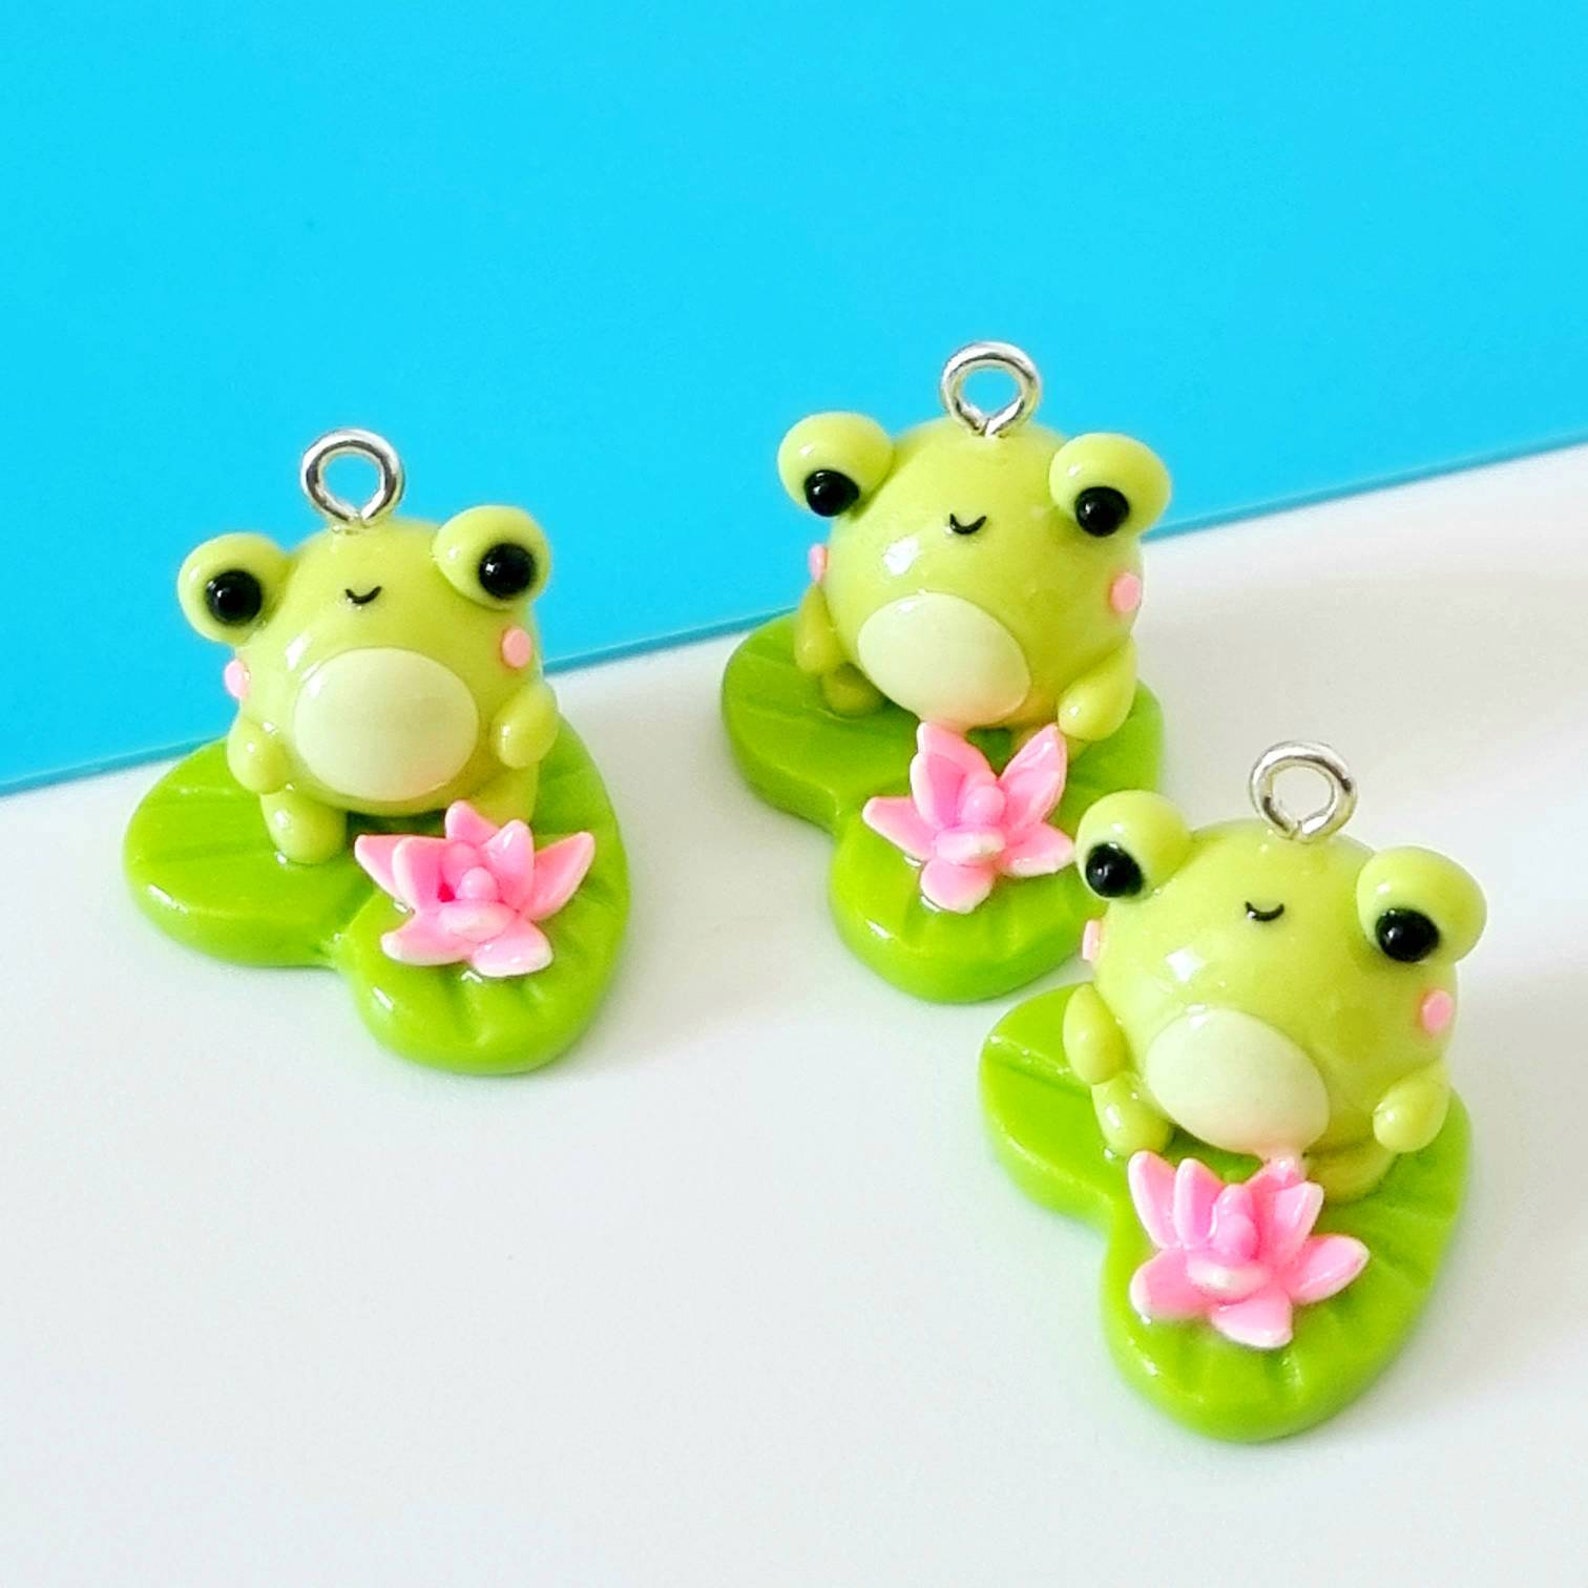 Kawaii Frog Lily Pad Charm Frog Accessories Frog Keychain | Etsy